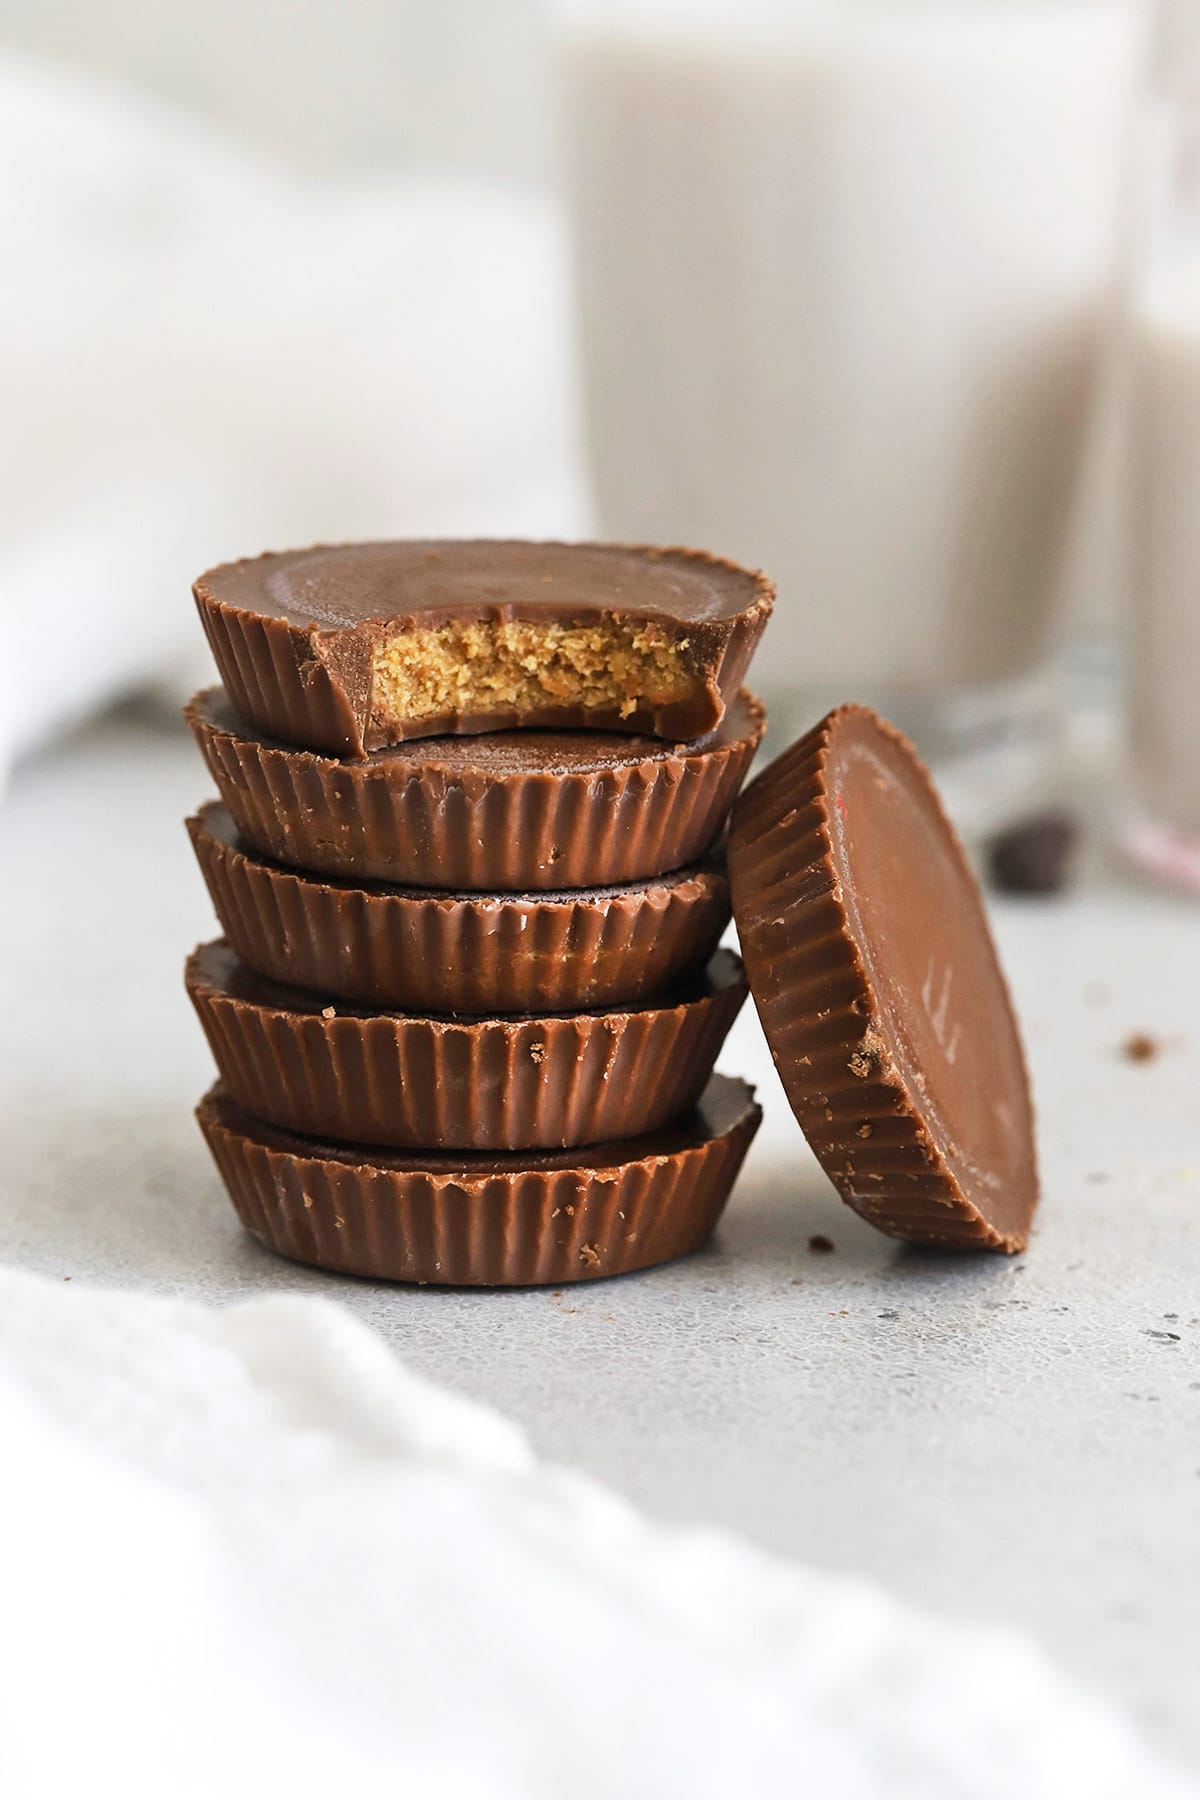 Stacked peanut butter cups for making gluten-free peanut butter cup brownies